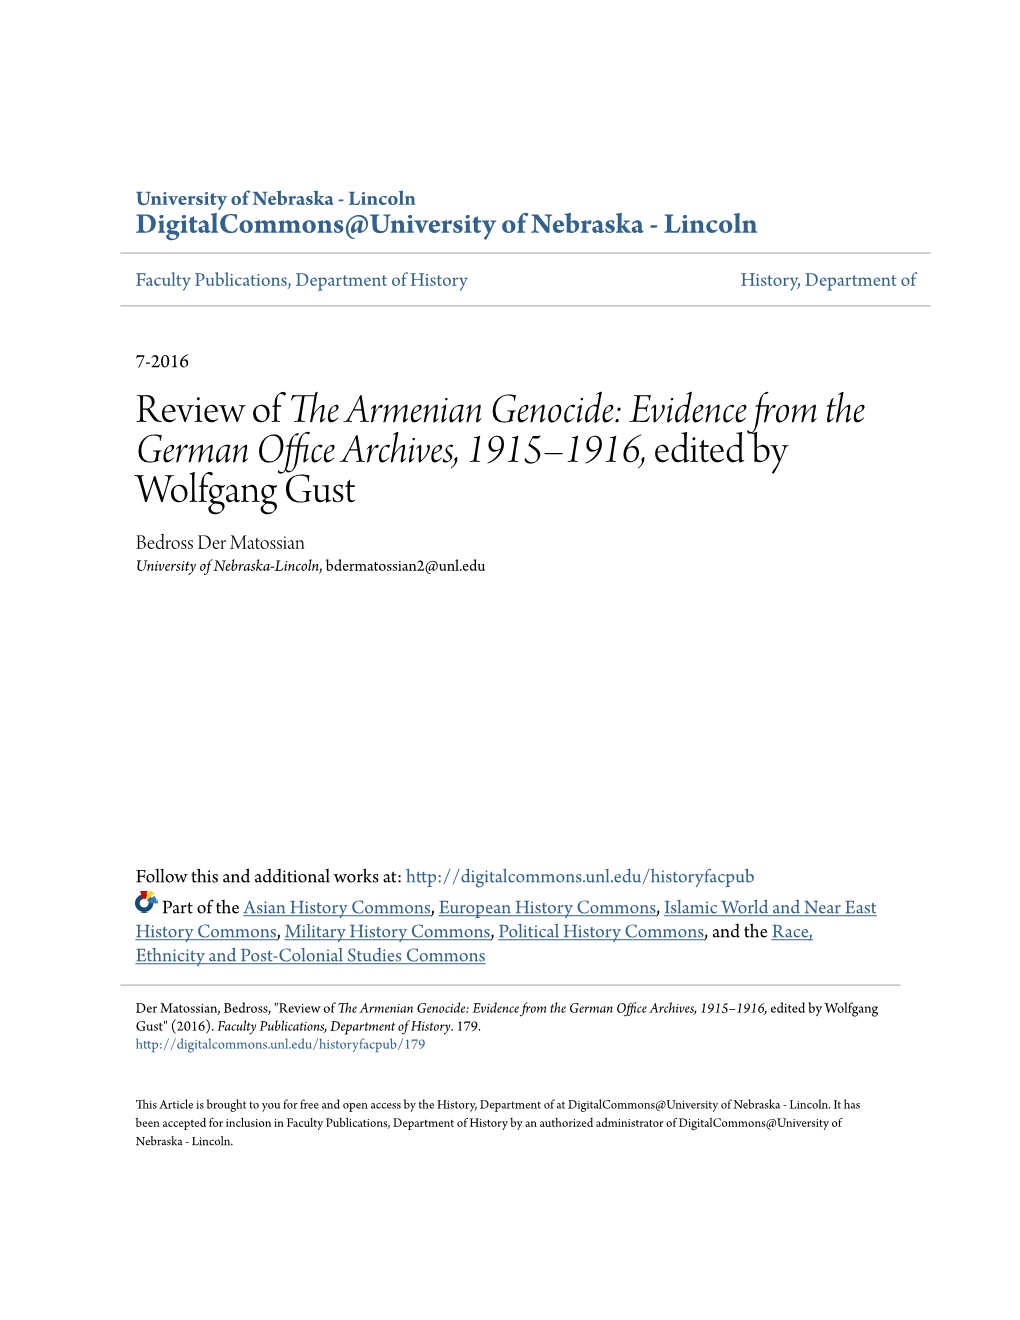 Review of the Armenian Genocide: Evidence from the German Office